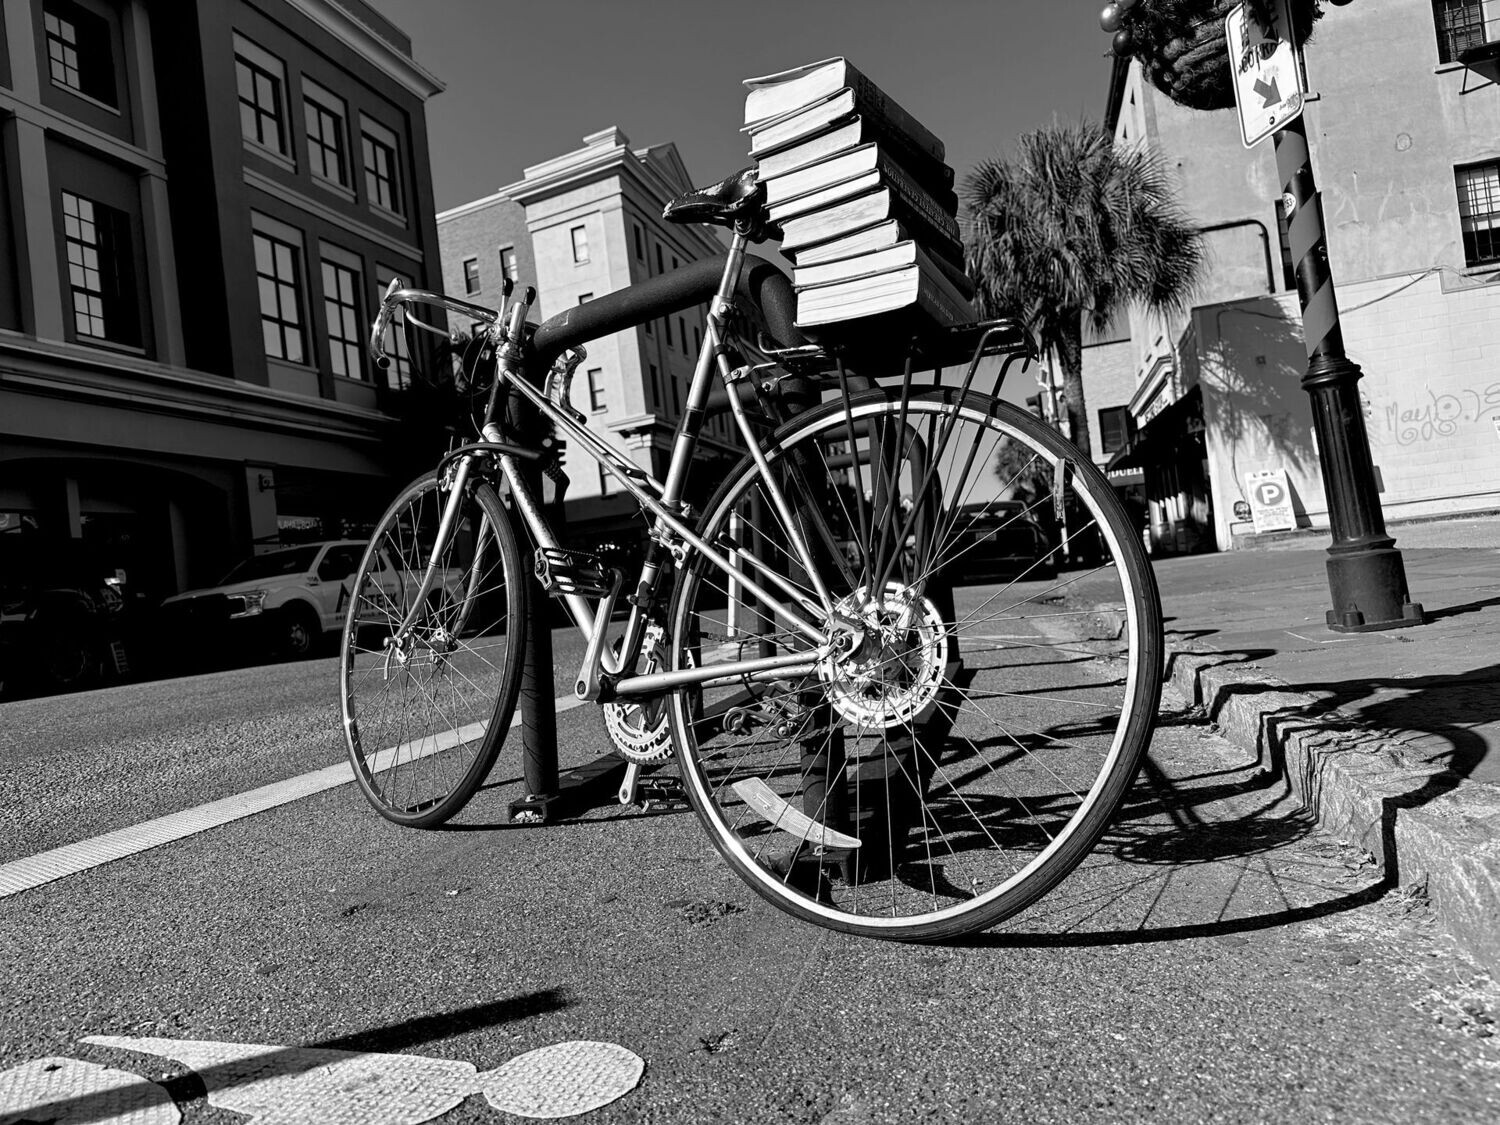 "Bookstore Bike" by Spencer Evans